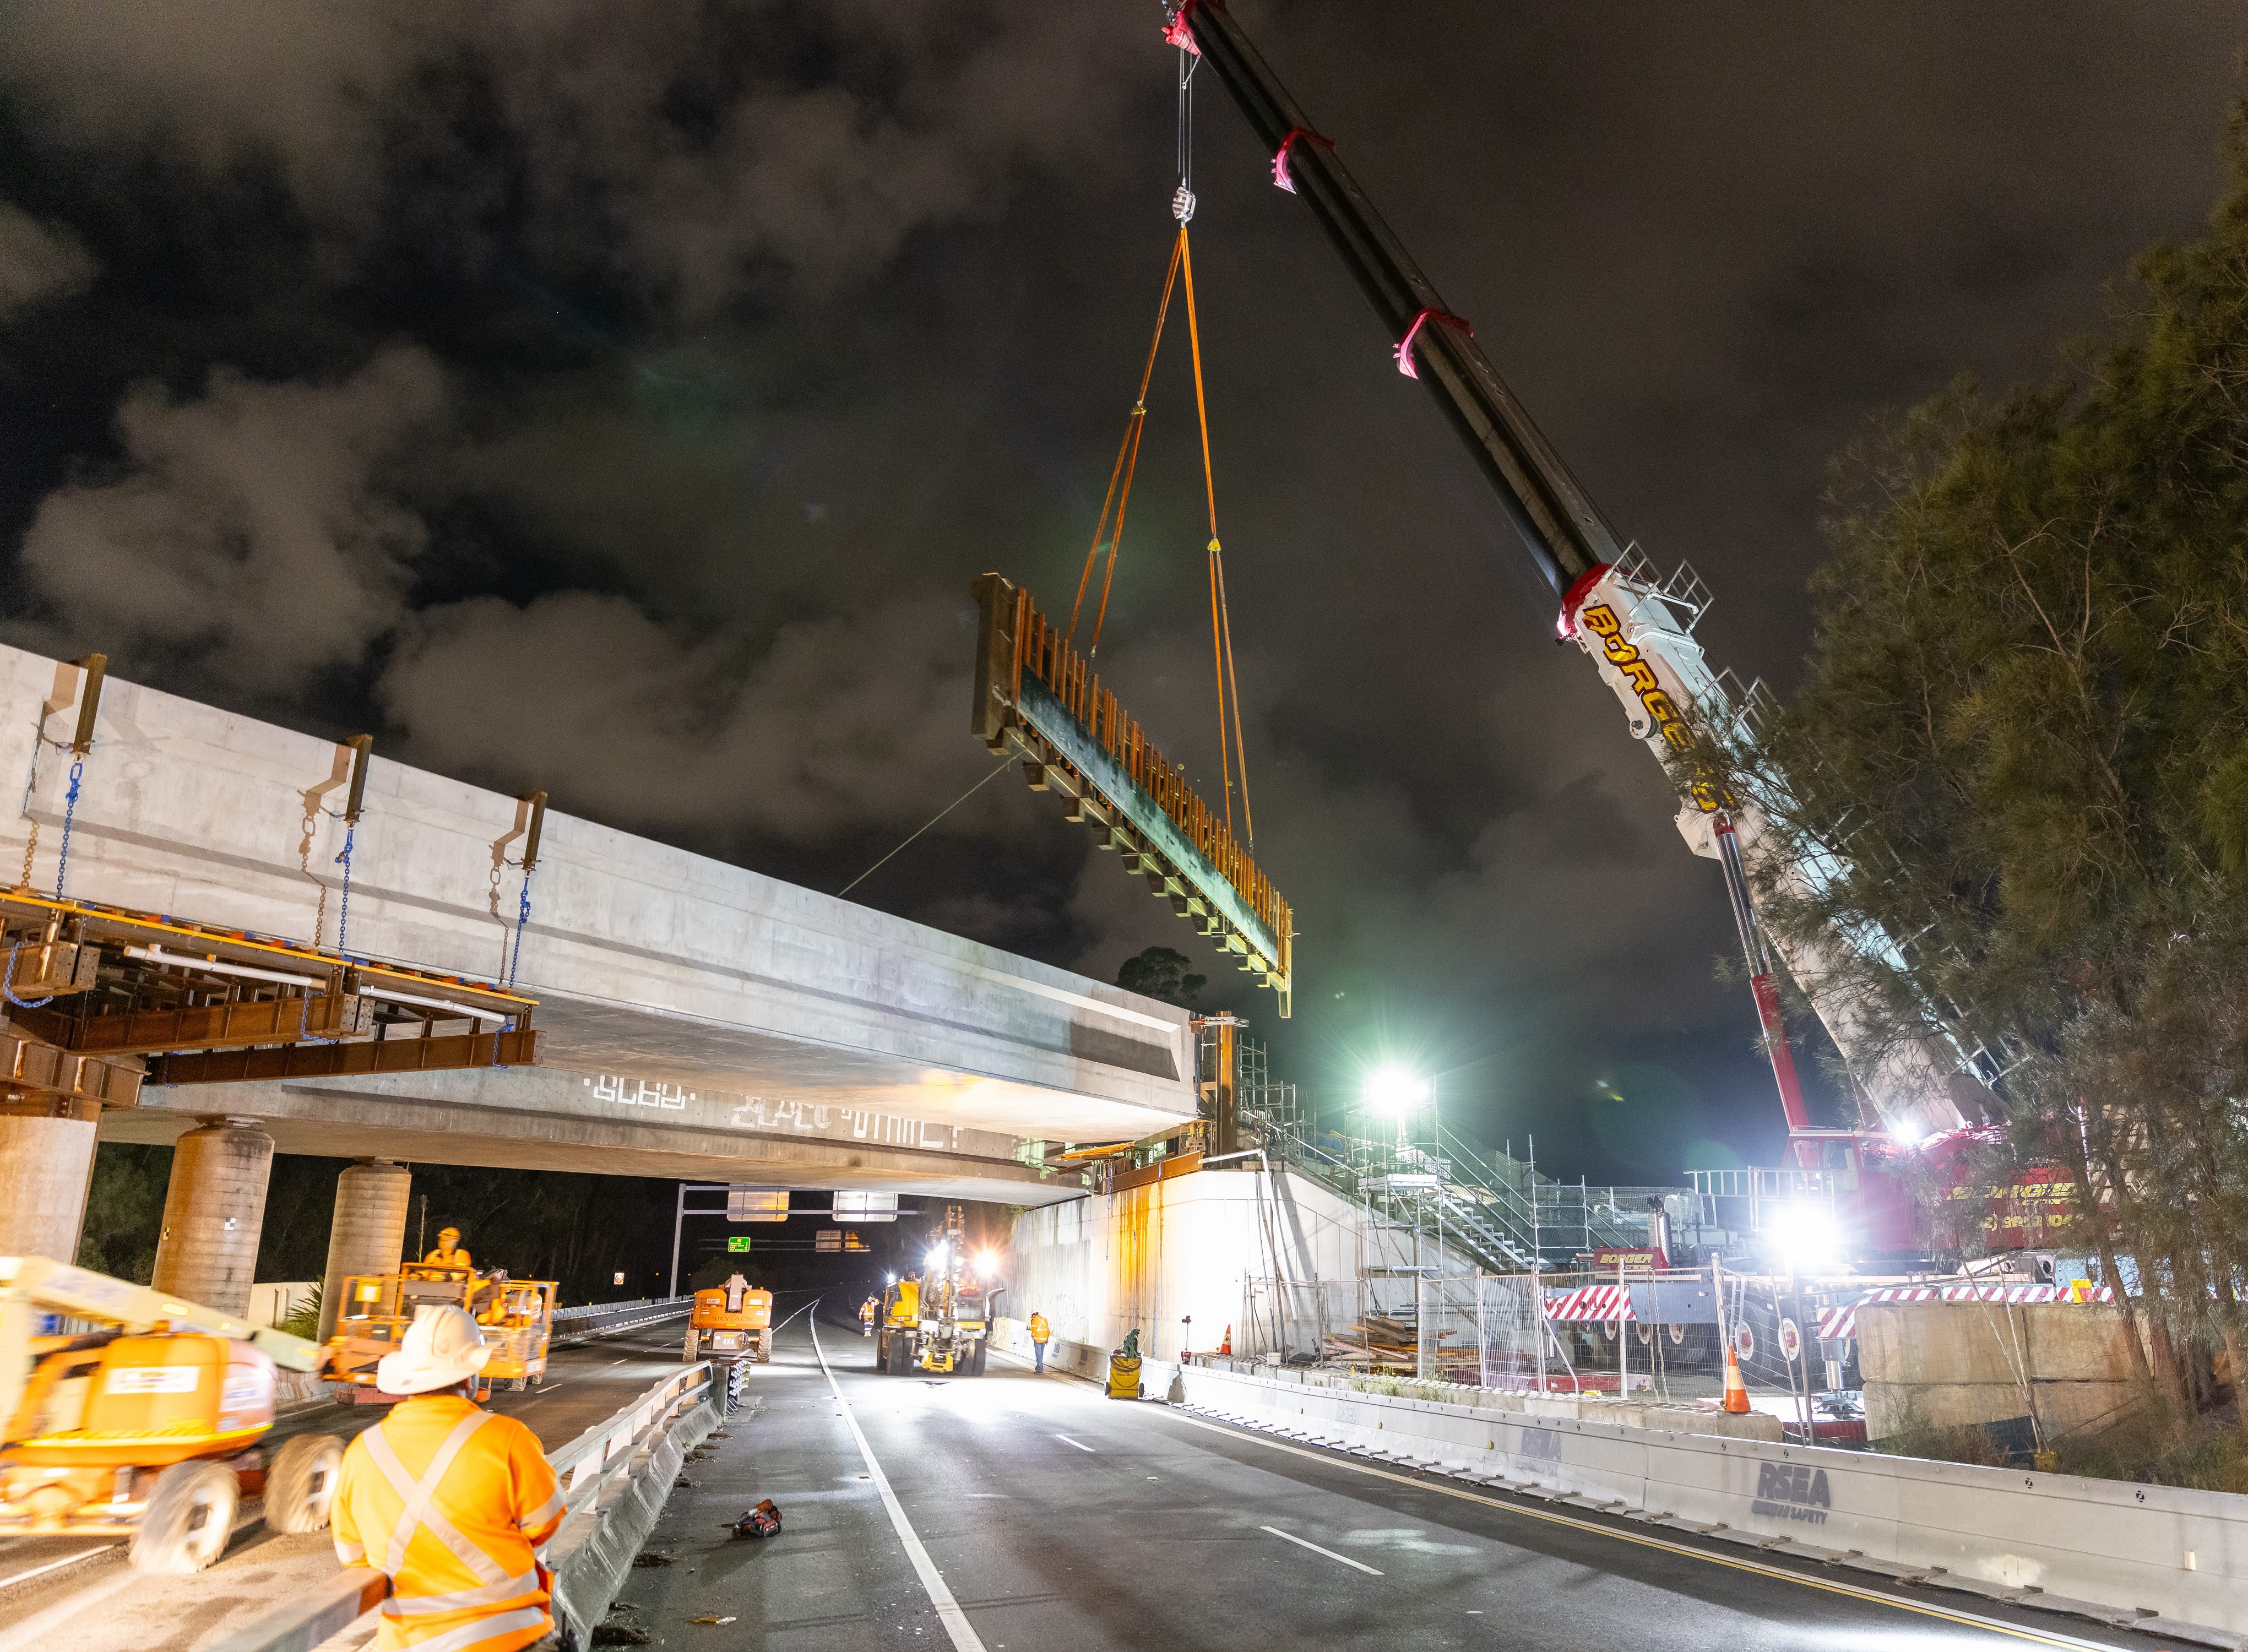 A section of steel truss is removed as part of Botany Rail Duplication works to duplicate the Southern Cross Drive bridge.